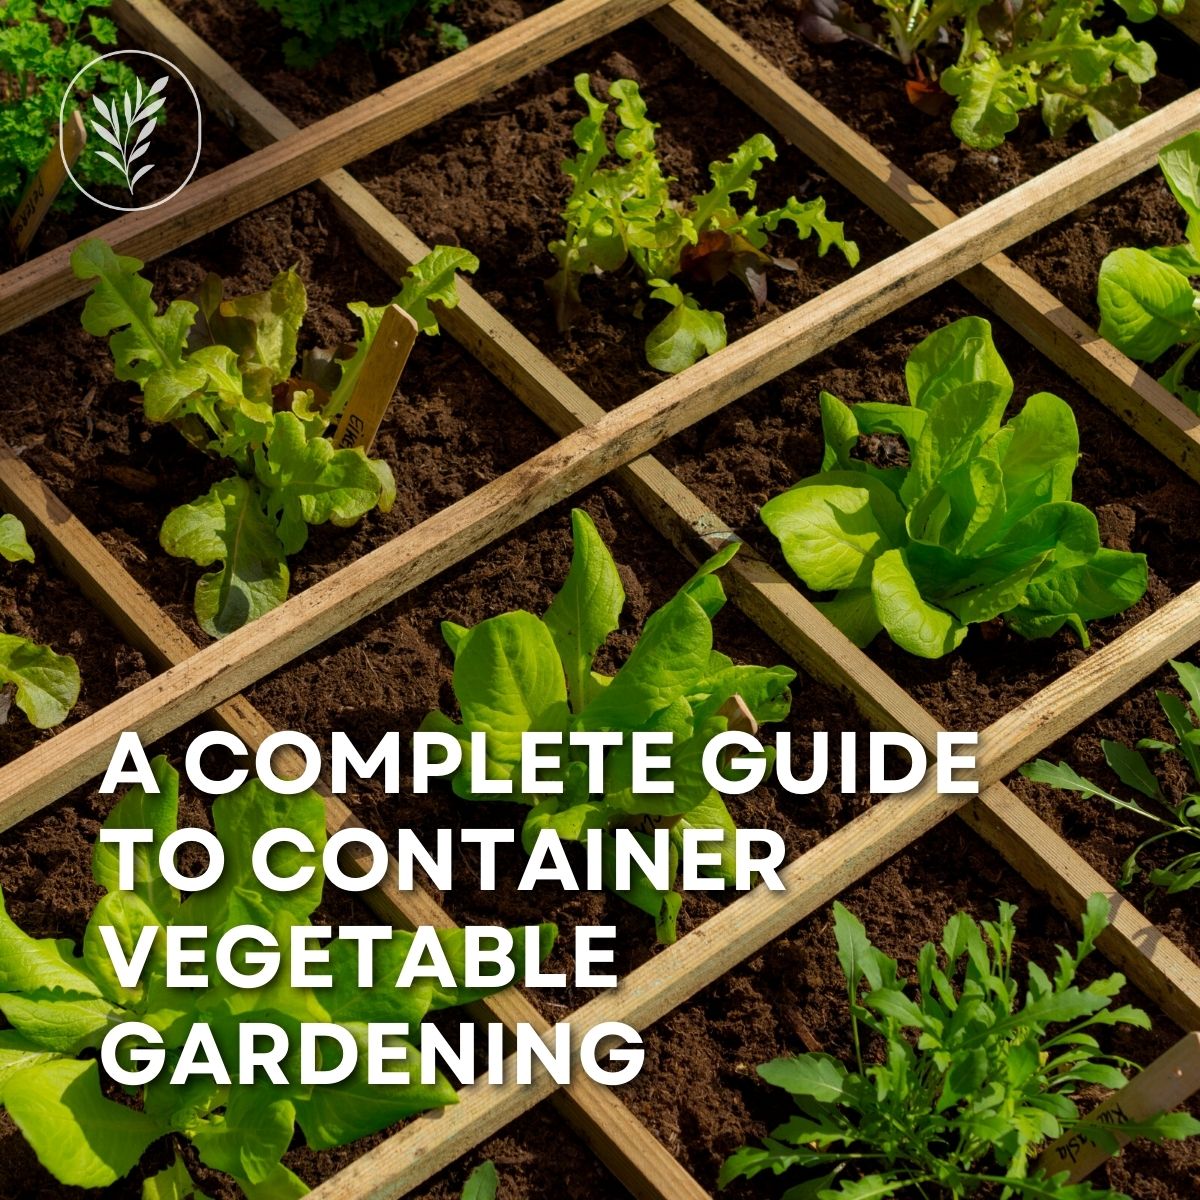 Container vegetable gardening a complete guide - instagram via @home4theharvest